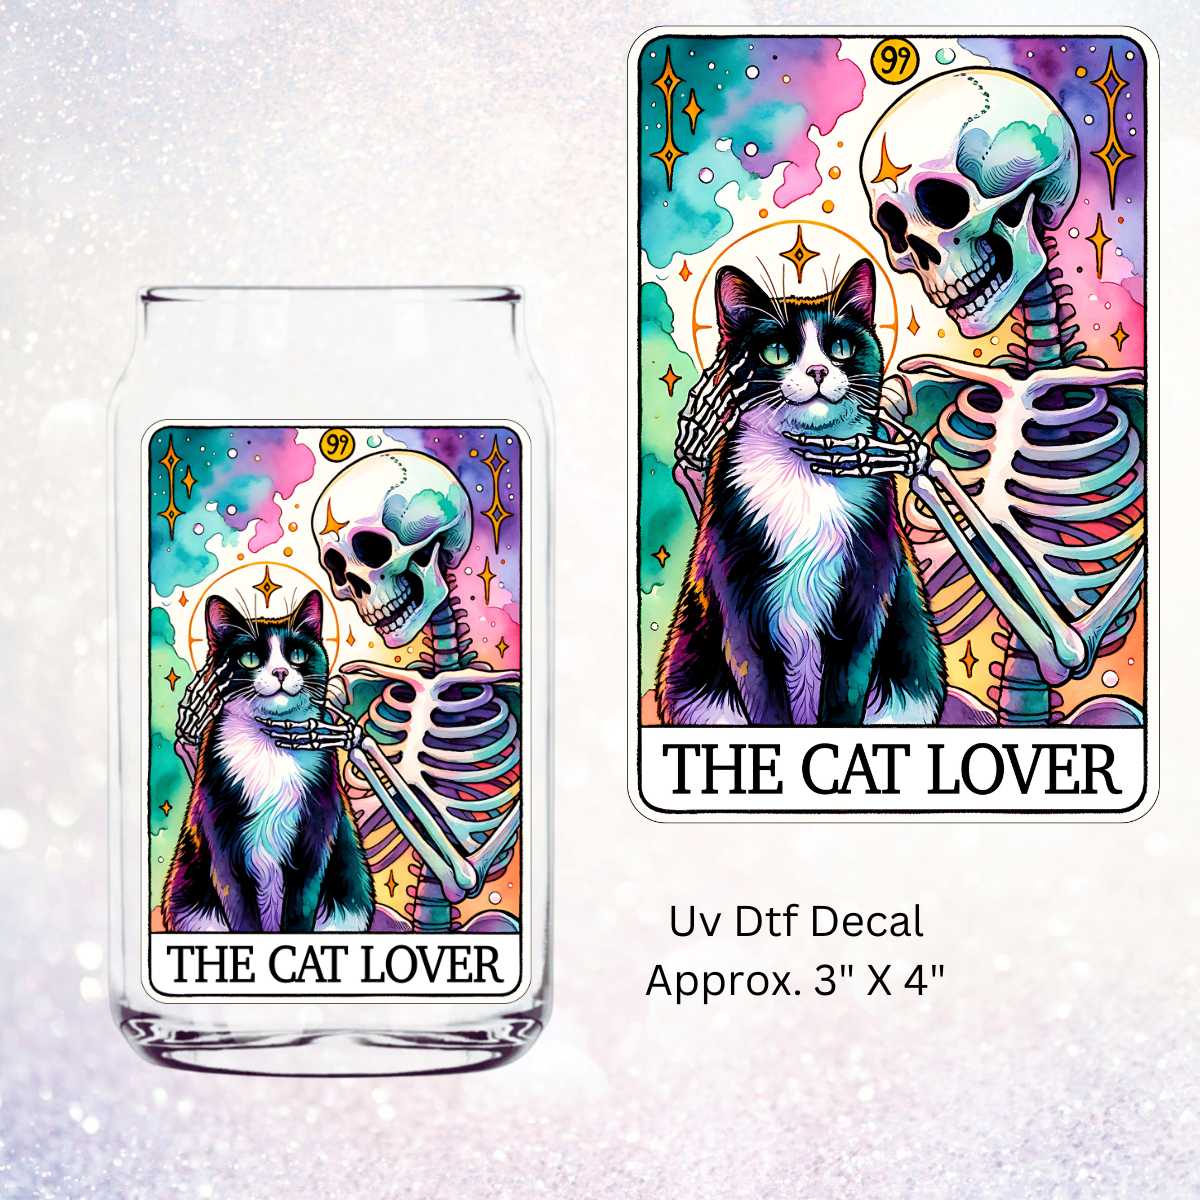 Uv Dtf Decal Tarot Card The Cat Lover